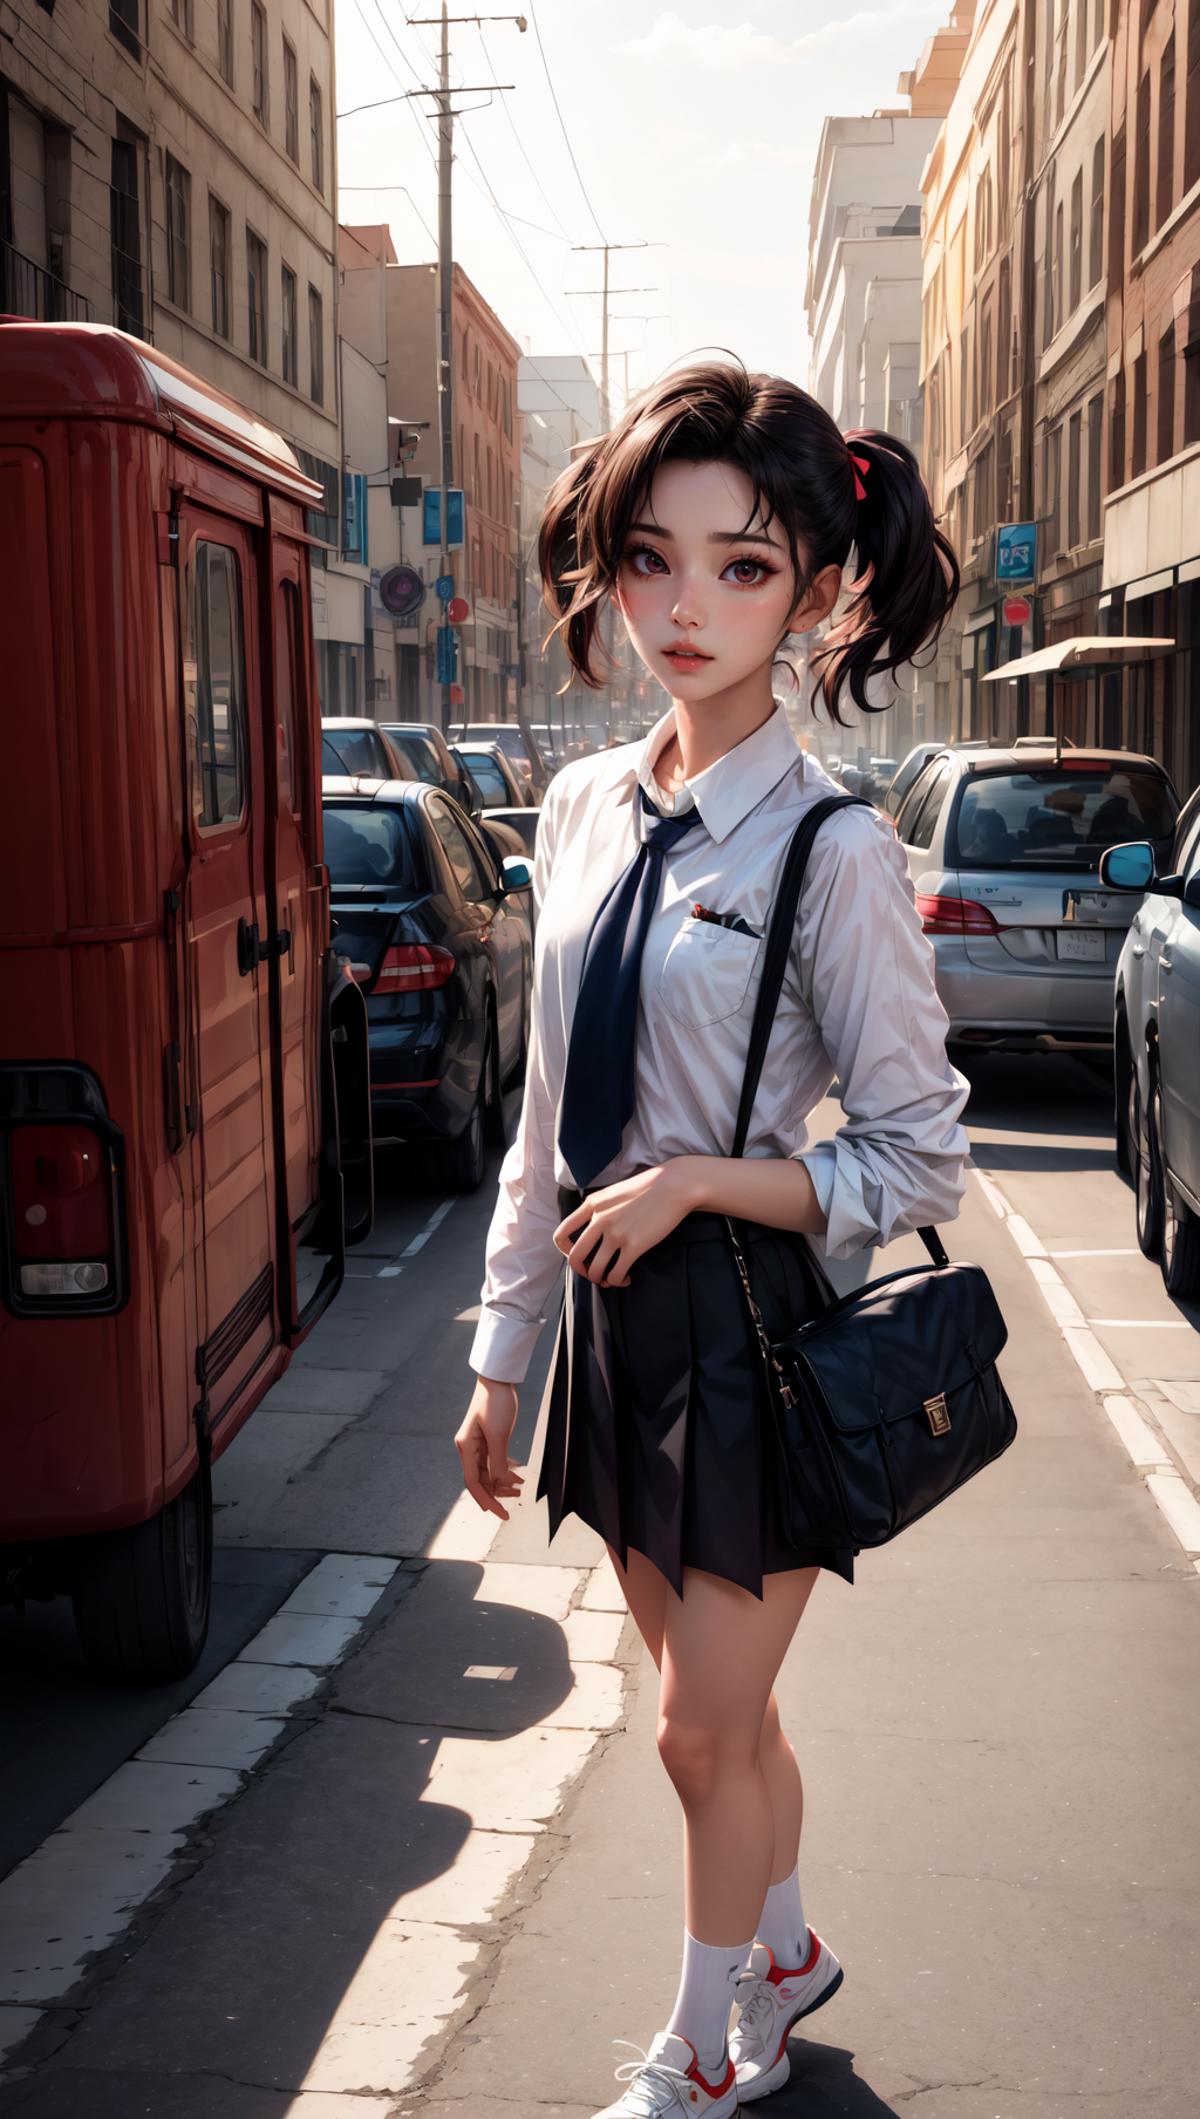 A young woman wearing a white shirt and black skirt walks down the street.